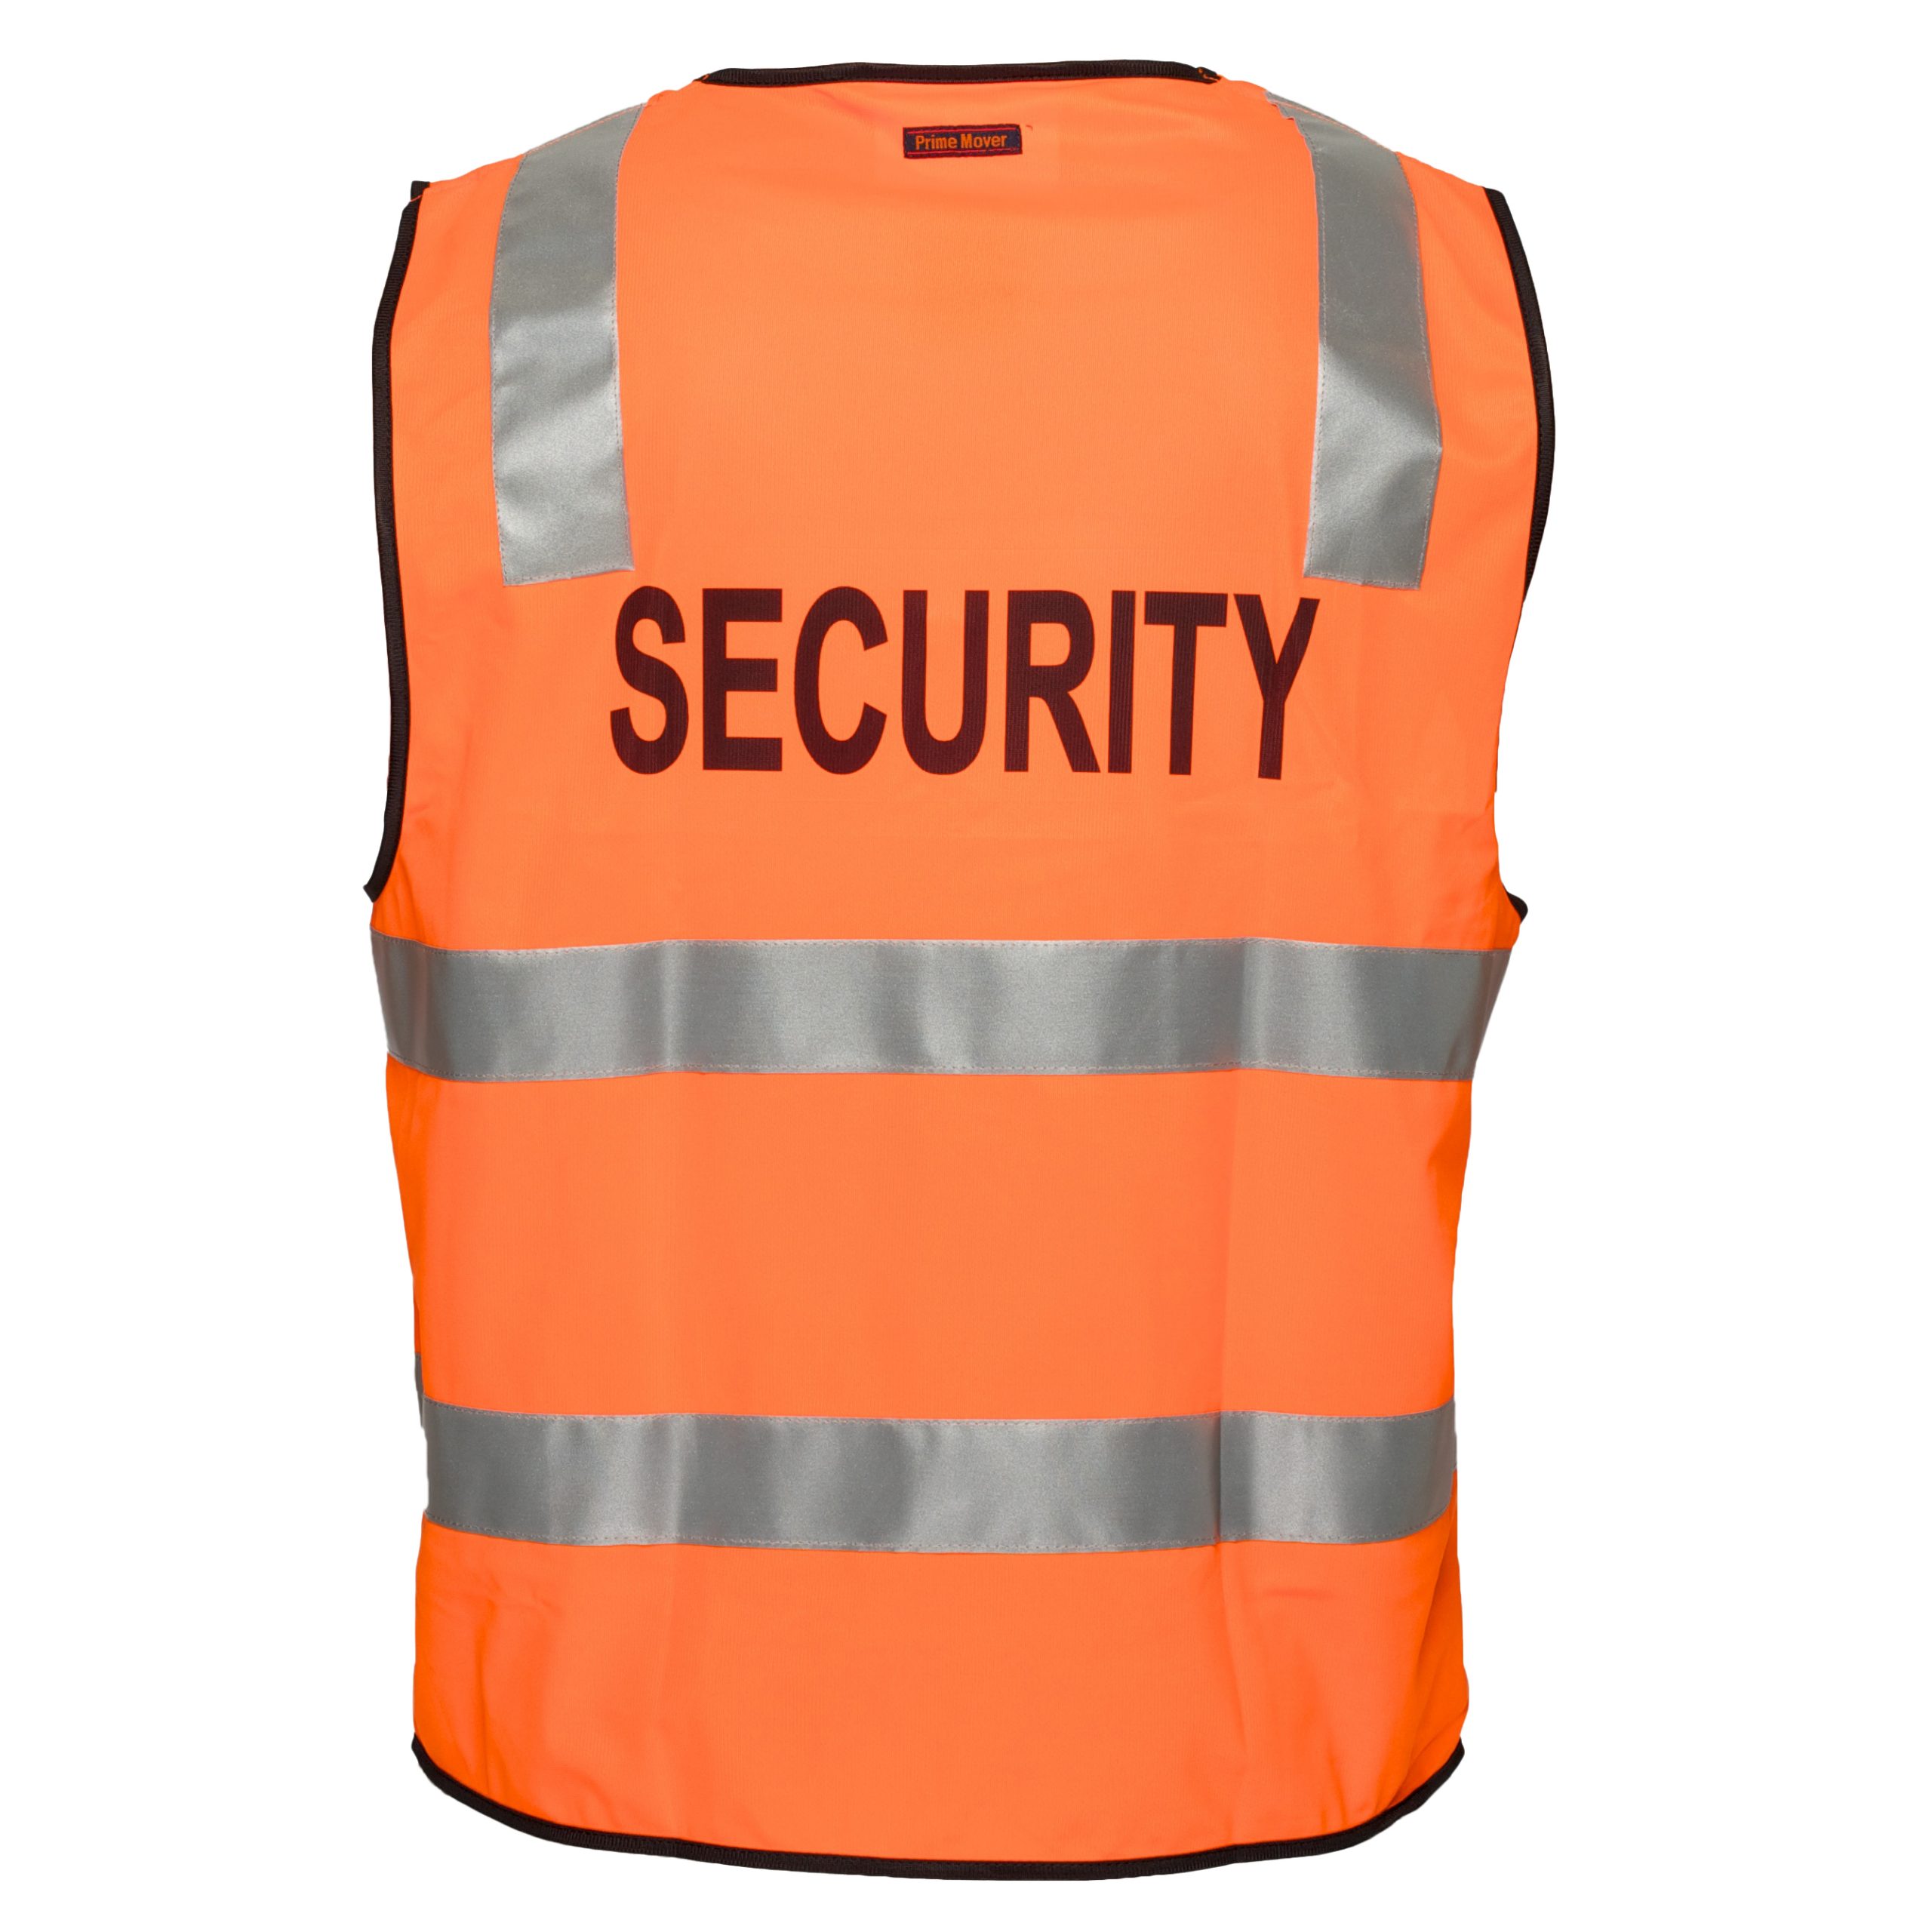 MZ108 - Day/Night Safety Vest with Tape - SECURITY O2